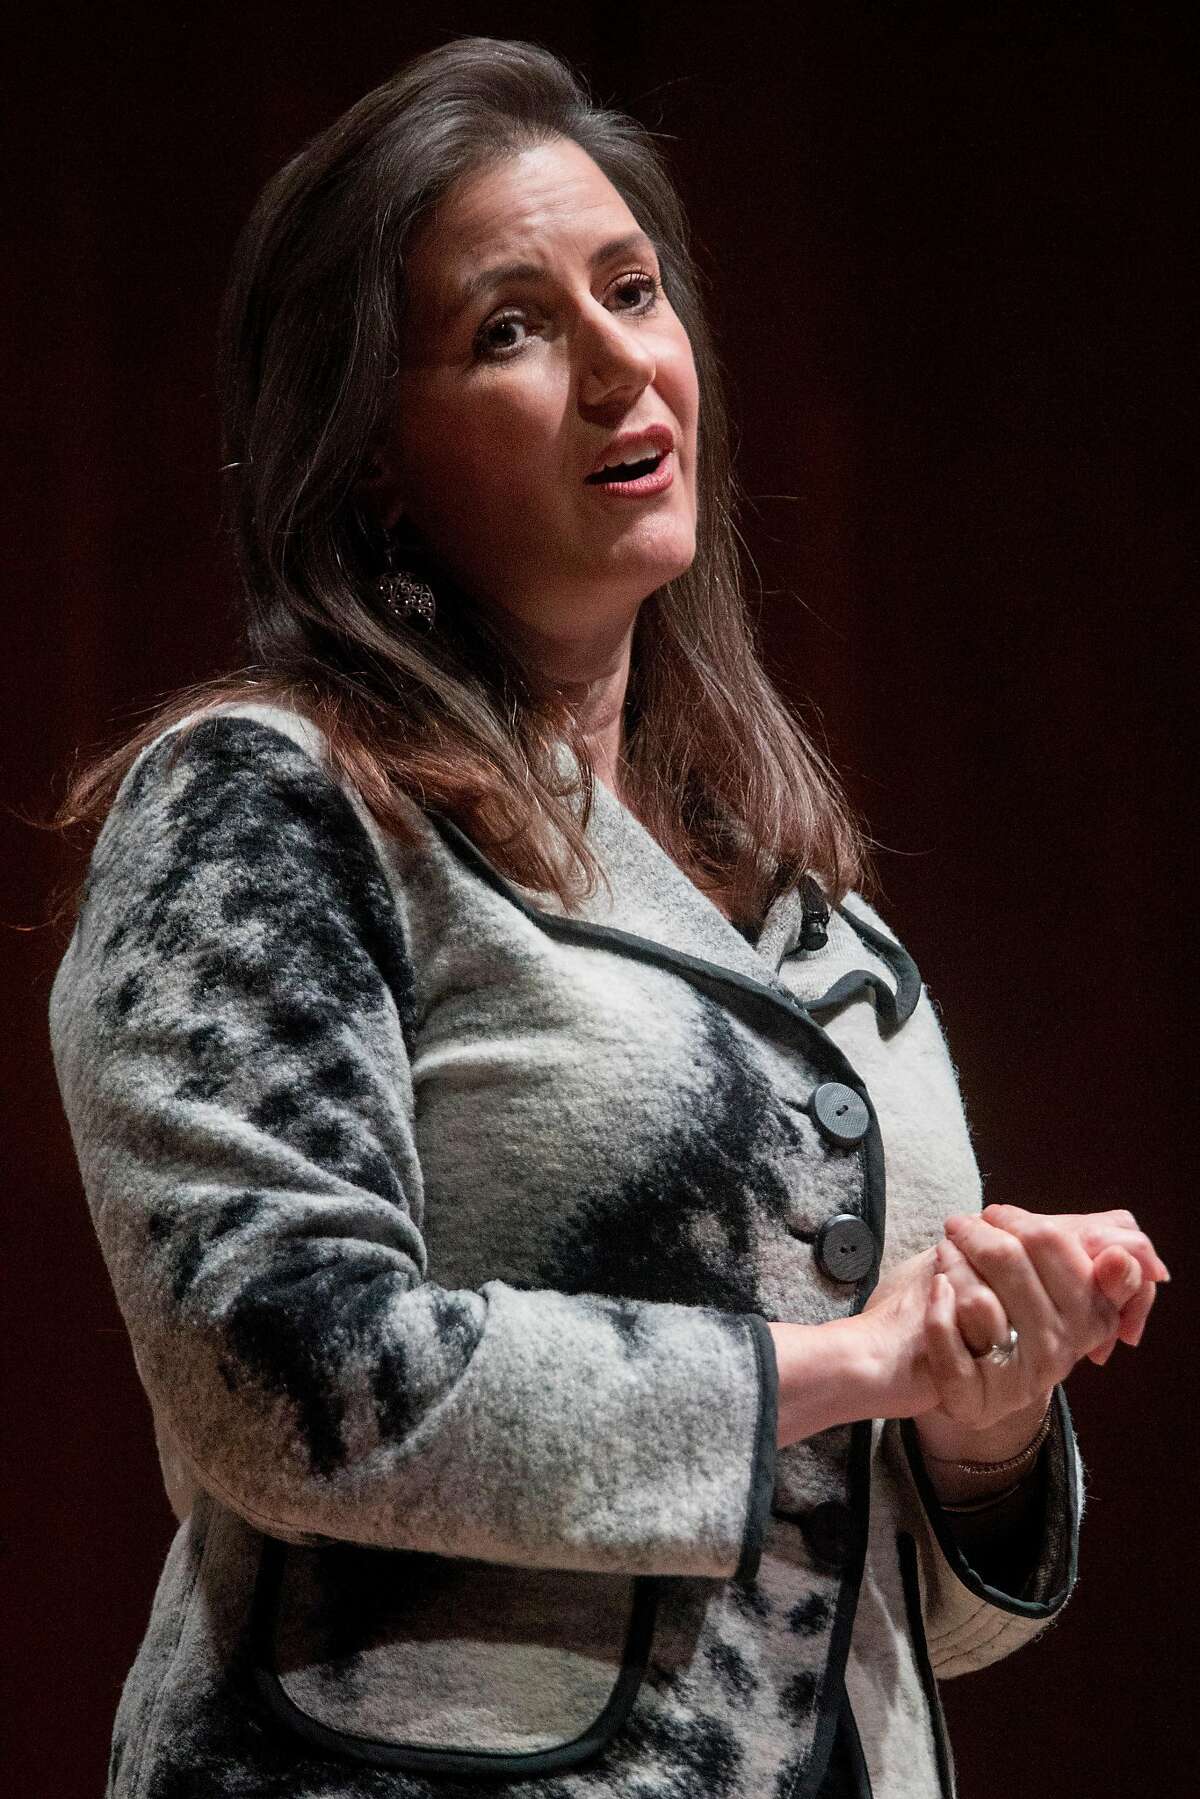 Oakland Mayor Libby Schaaf delivers her State of the City address at the Oakland Museum in Oakland, Calif. Friday, February 7, 2020.